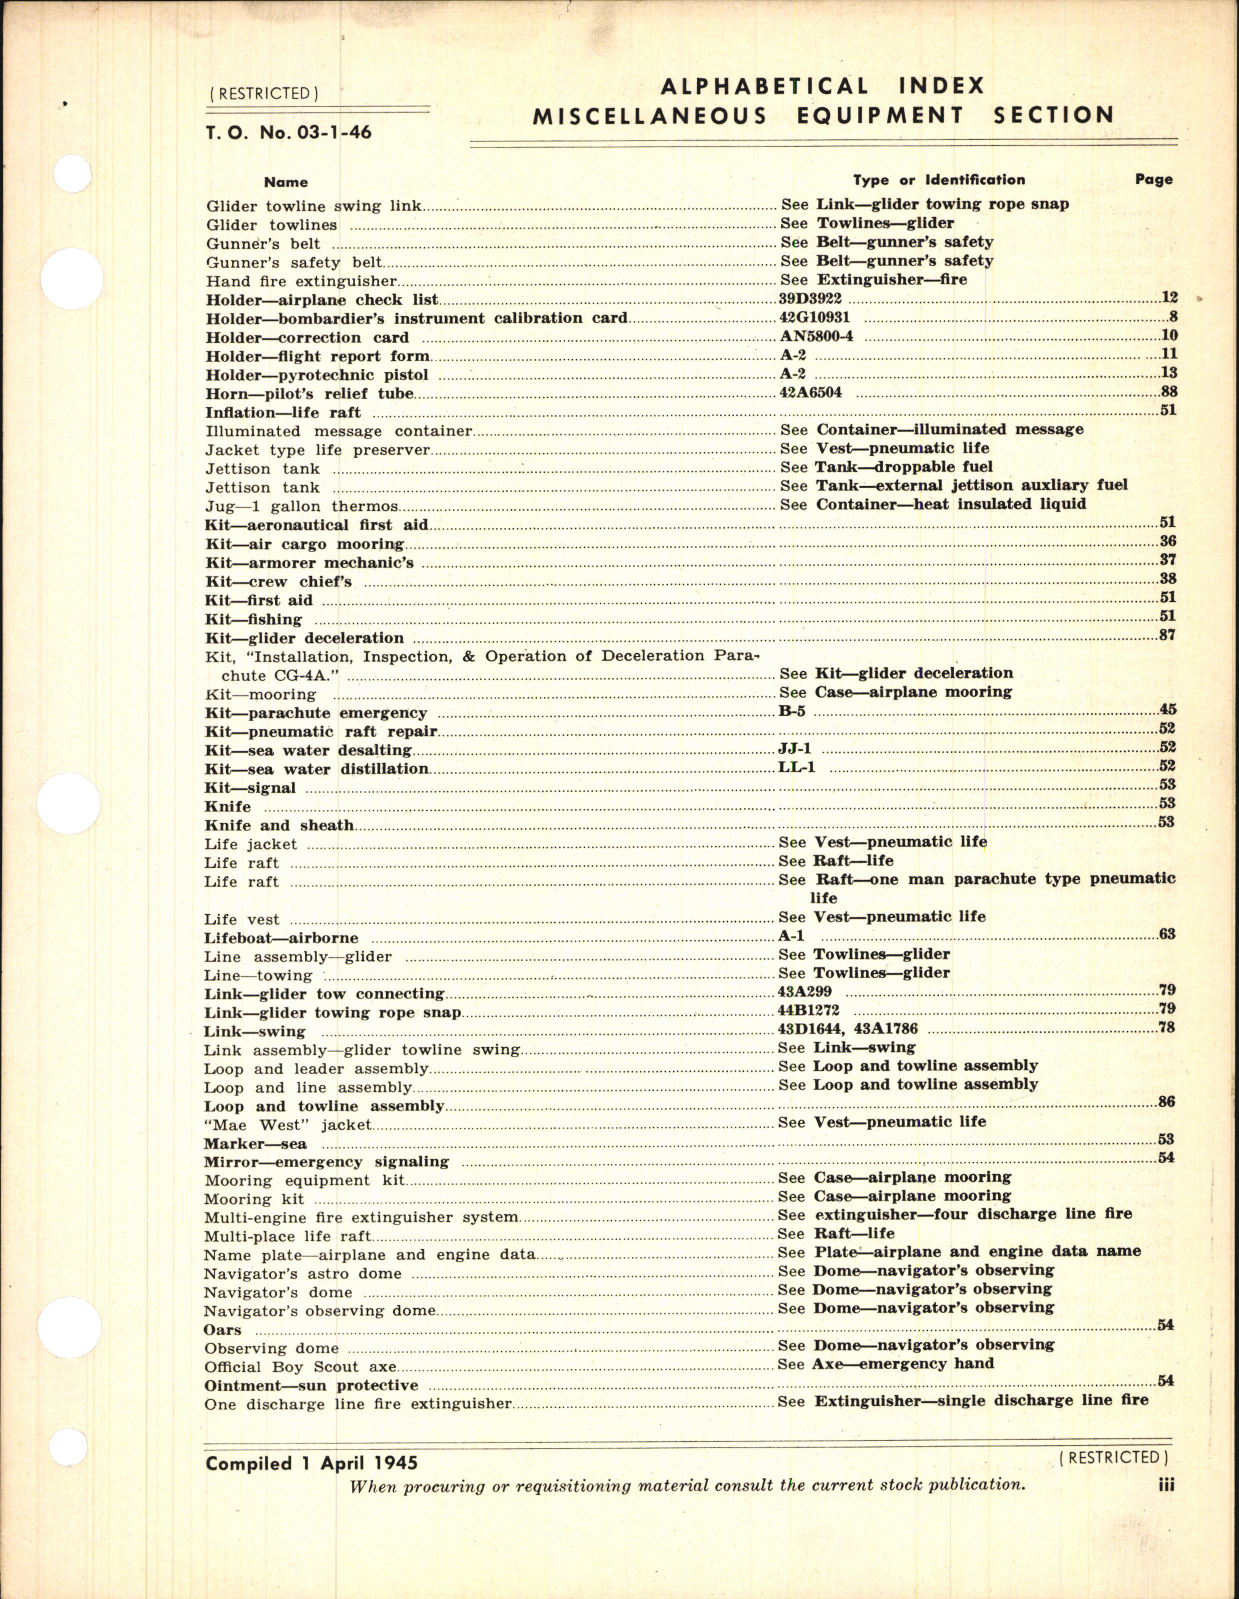 Sample page 5 from AirCorps Library document: Index of Army-Navy Miscellaneous Aeronautical Equipment 